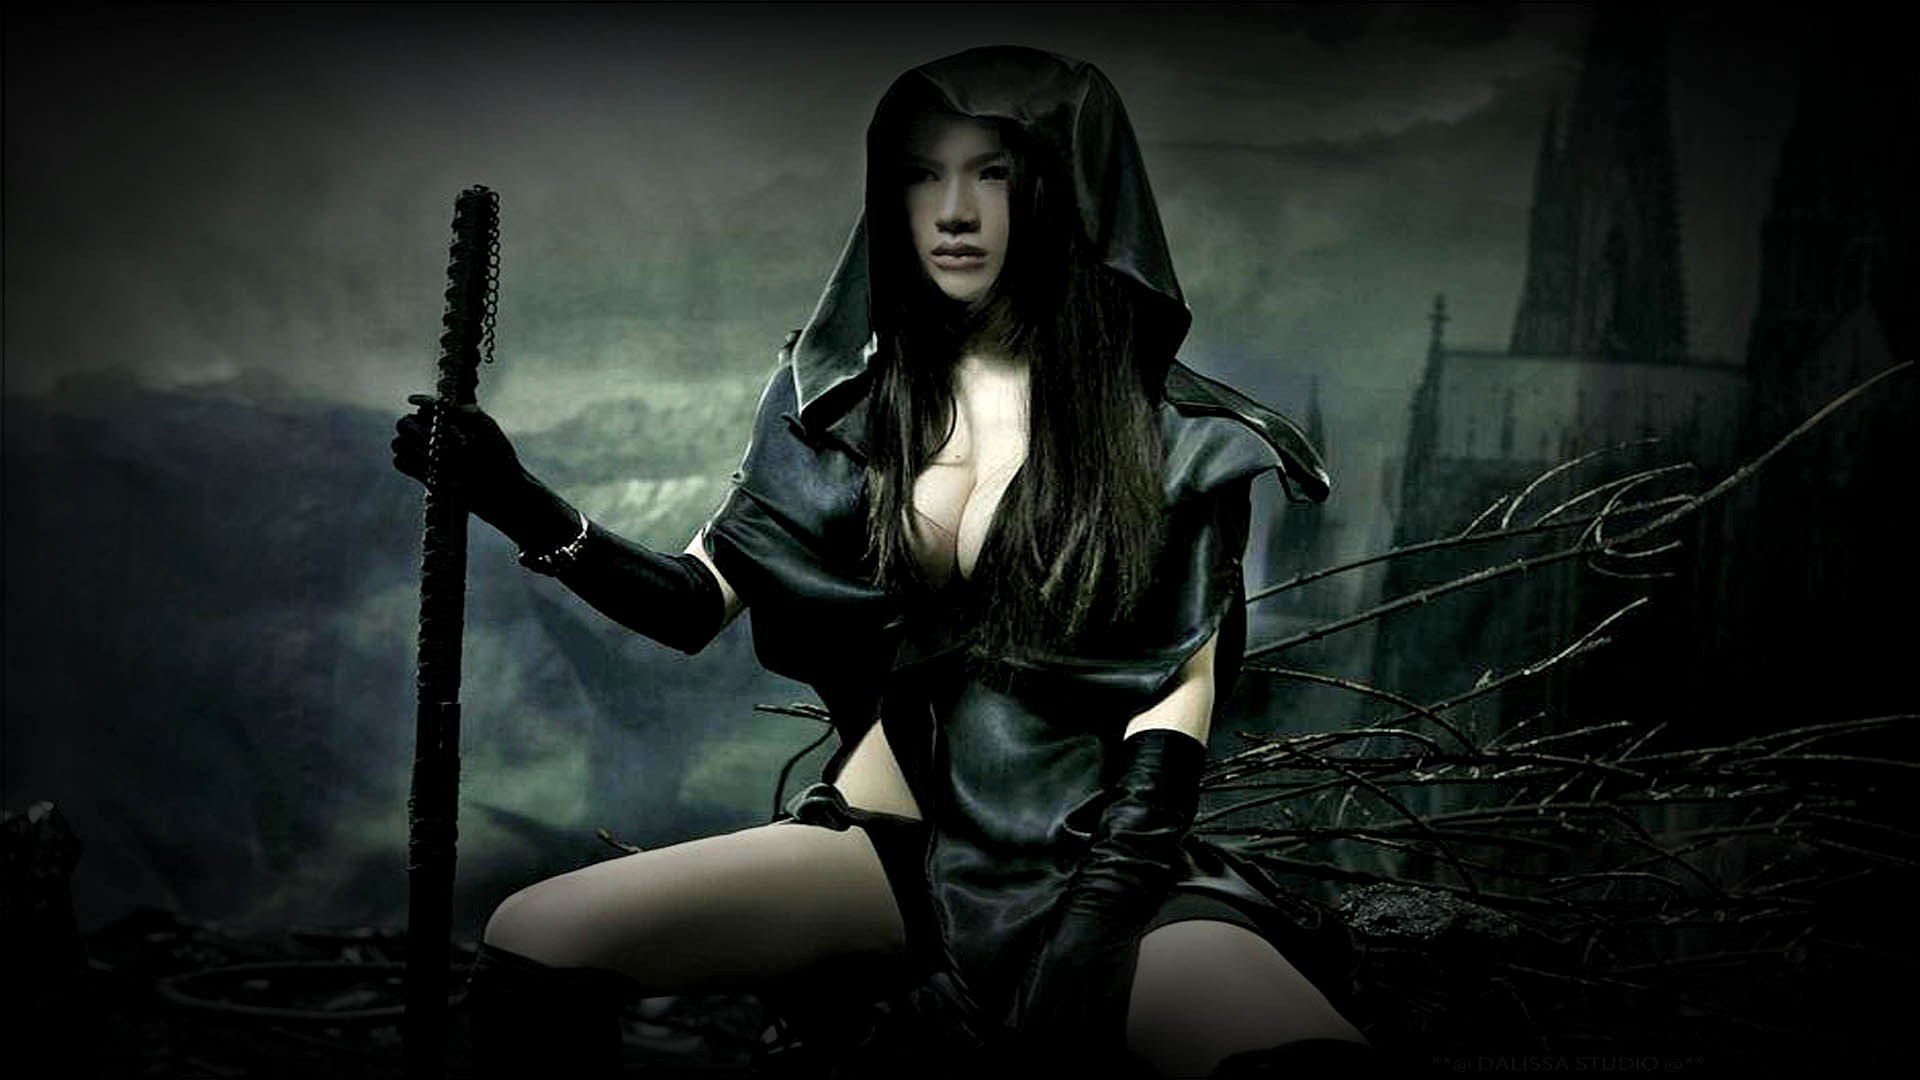 1920x1080 1920-x-1080-px-Backgrounds-High-Resolution-dark-gothic-pic-by-Happy-WilKinson-for- TWD-wallpaper-wpc920573